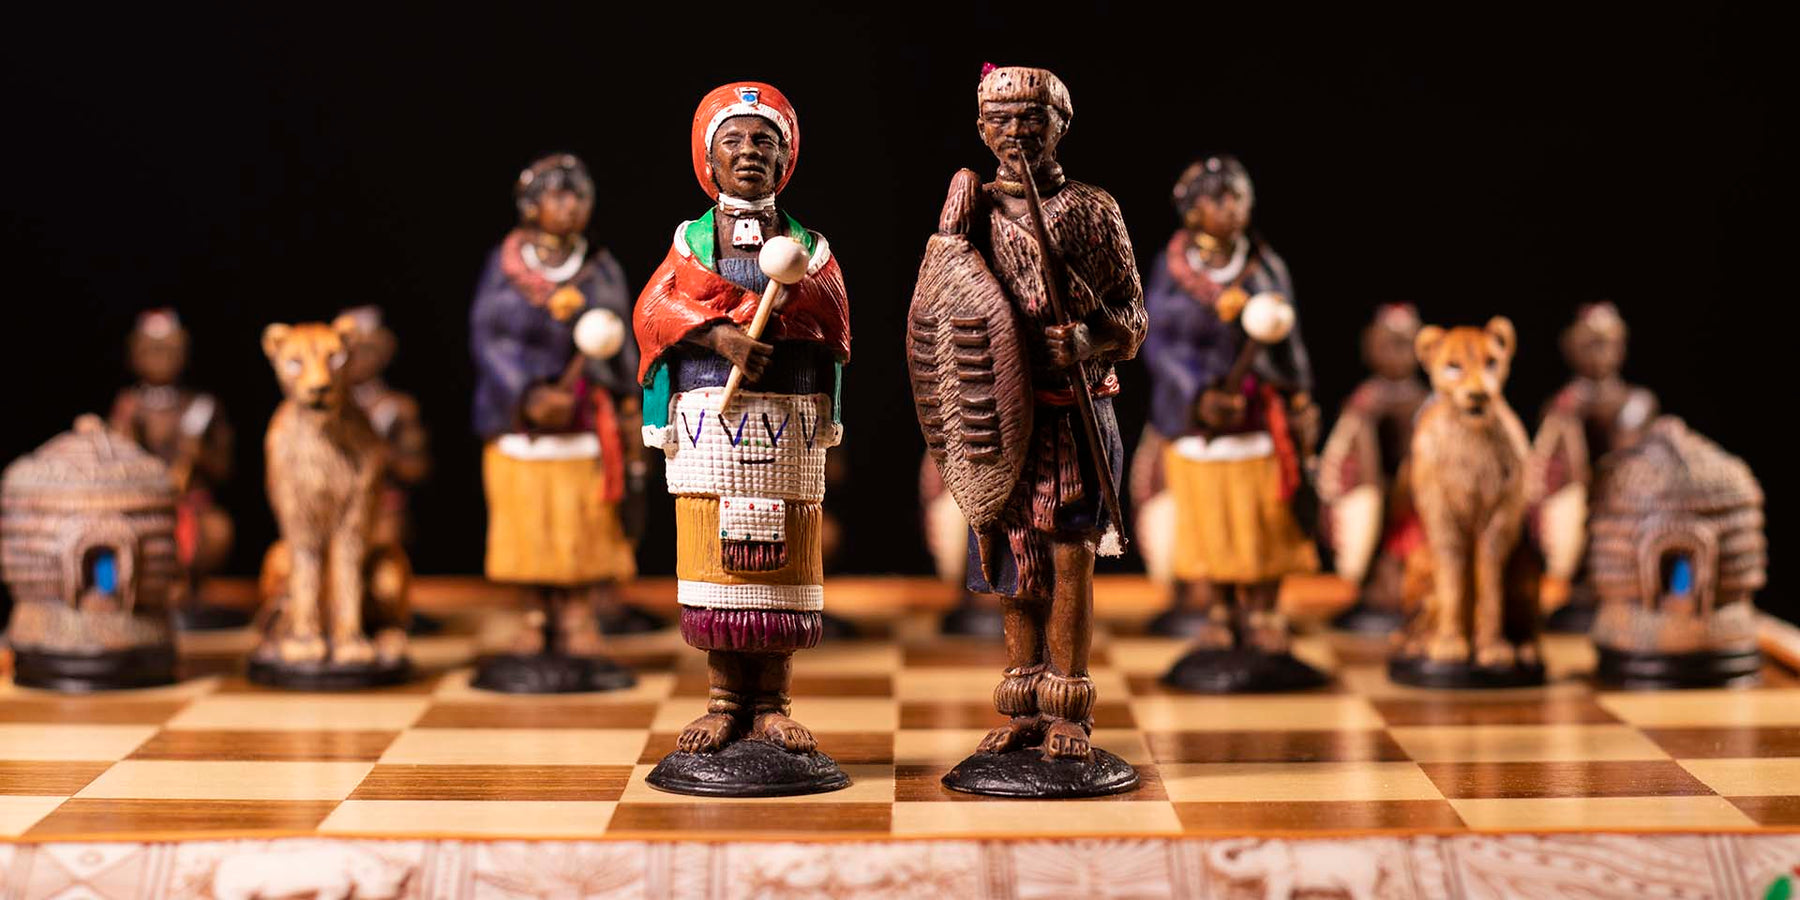 Chess Sets and Pieces  Buy Chess Pieces and Boards Online